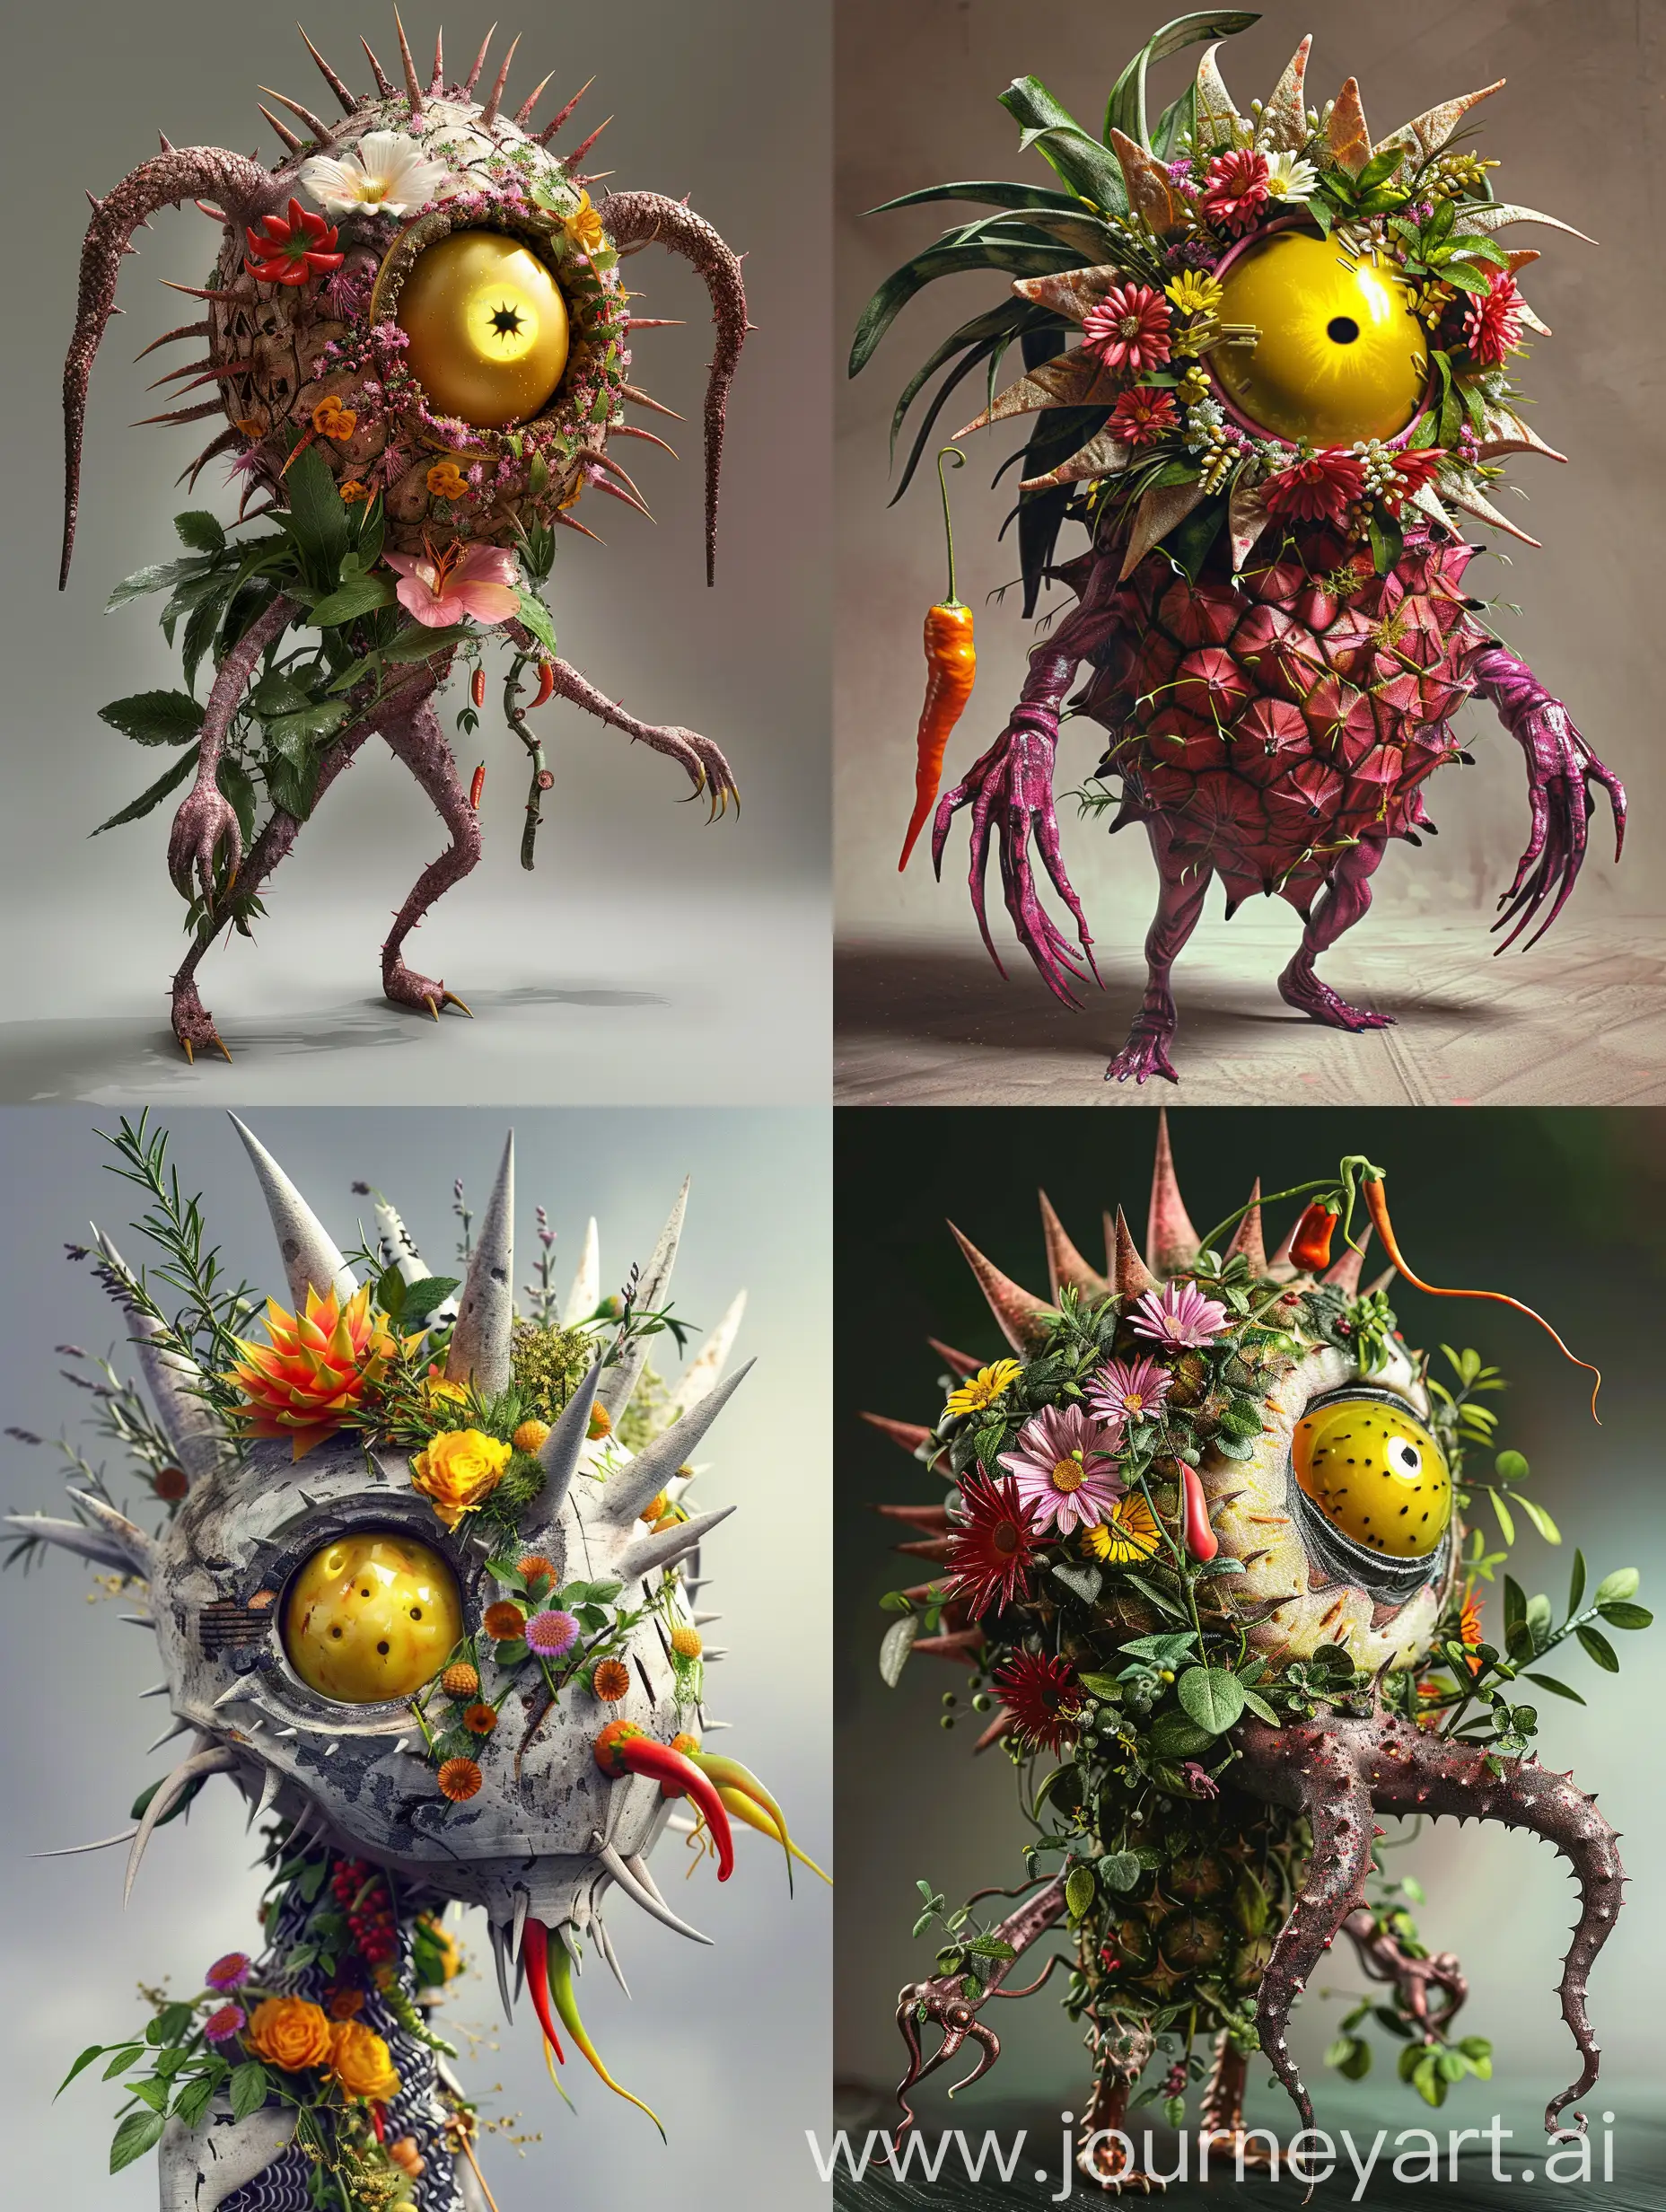 64K photo: French New Wave Vogue, pieapple knight helmet with flowers, herbs, radiating mega-charm, innocence. The main character should be an anthropomorphic Dragon fruit cyclops with one big yellow eye. Instead of hands, it has tentacles with superhot habanero peppers at the ends. Rugged face exudes joy, kindness; flamboyant futuristic costume floats with elegance, panache, allure. Whimsical spikes trails brilliant charm in mega-dynamic masterpiece of original style, Ultraphotorealistic, cinematic, ultradetailed, flamboyant, elegant, stylish, eccentric, hilariously dumb yet creative.